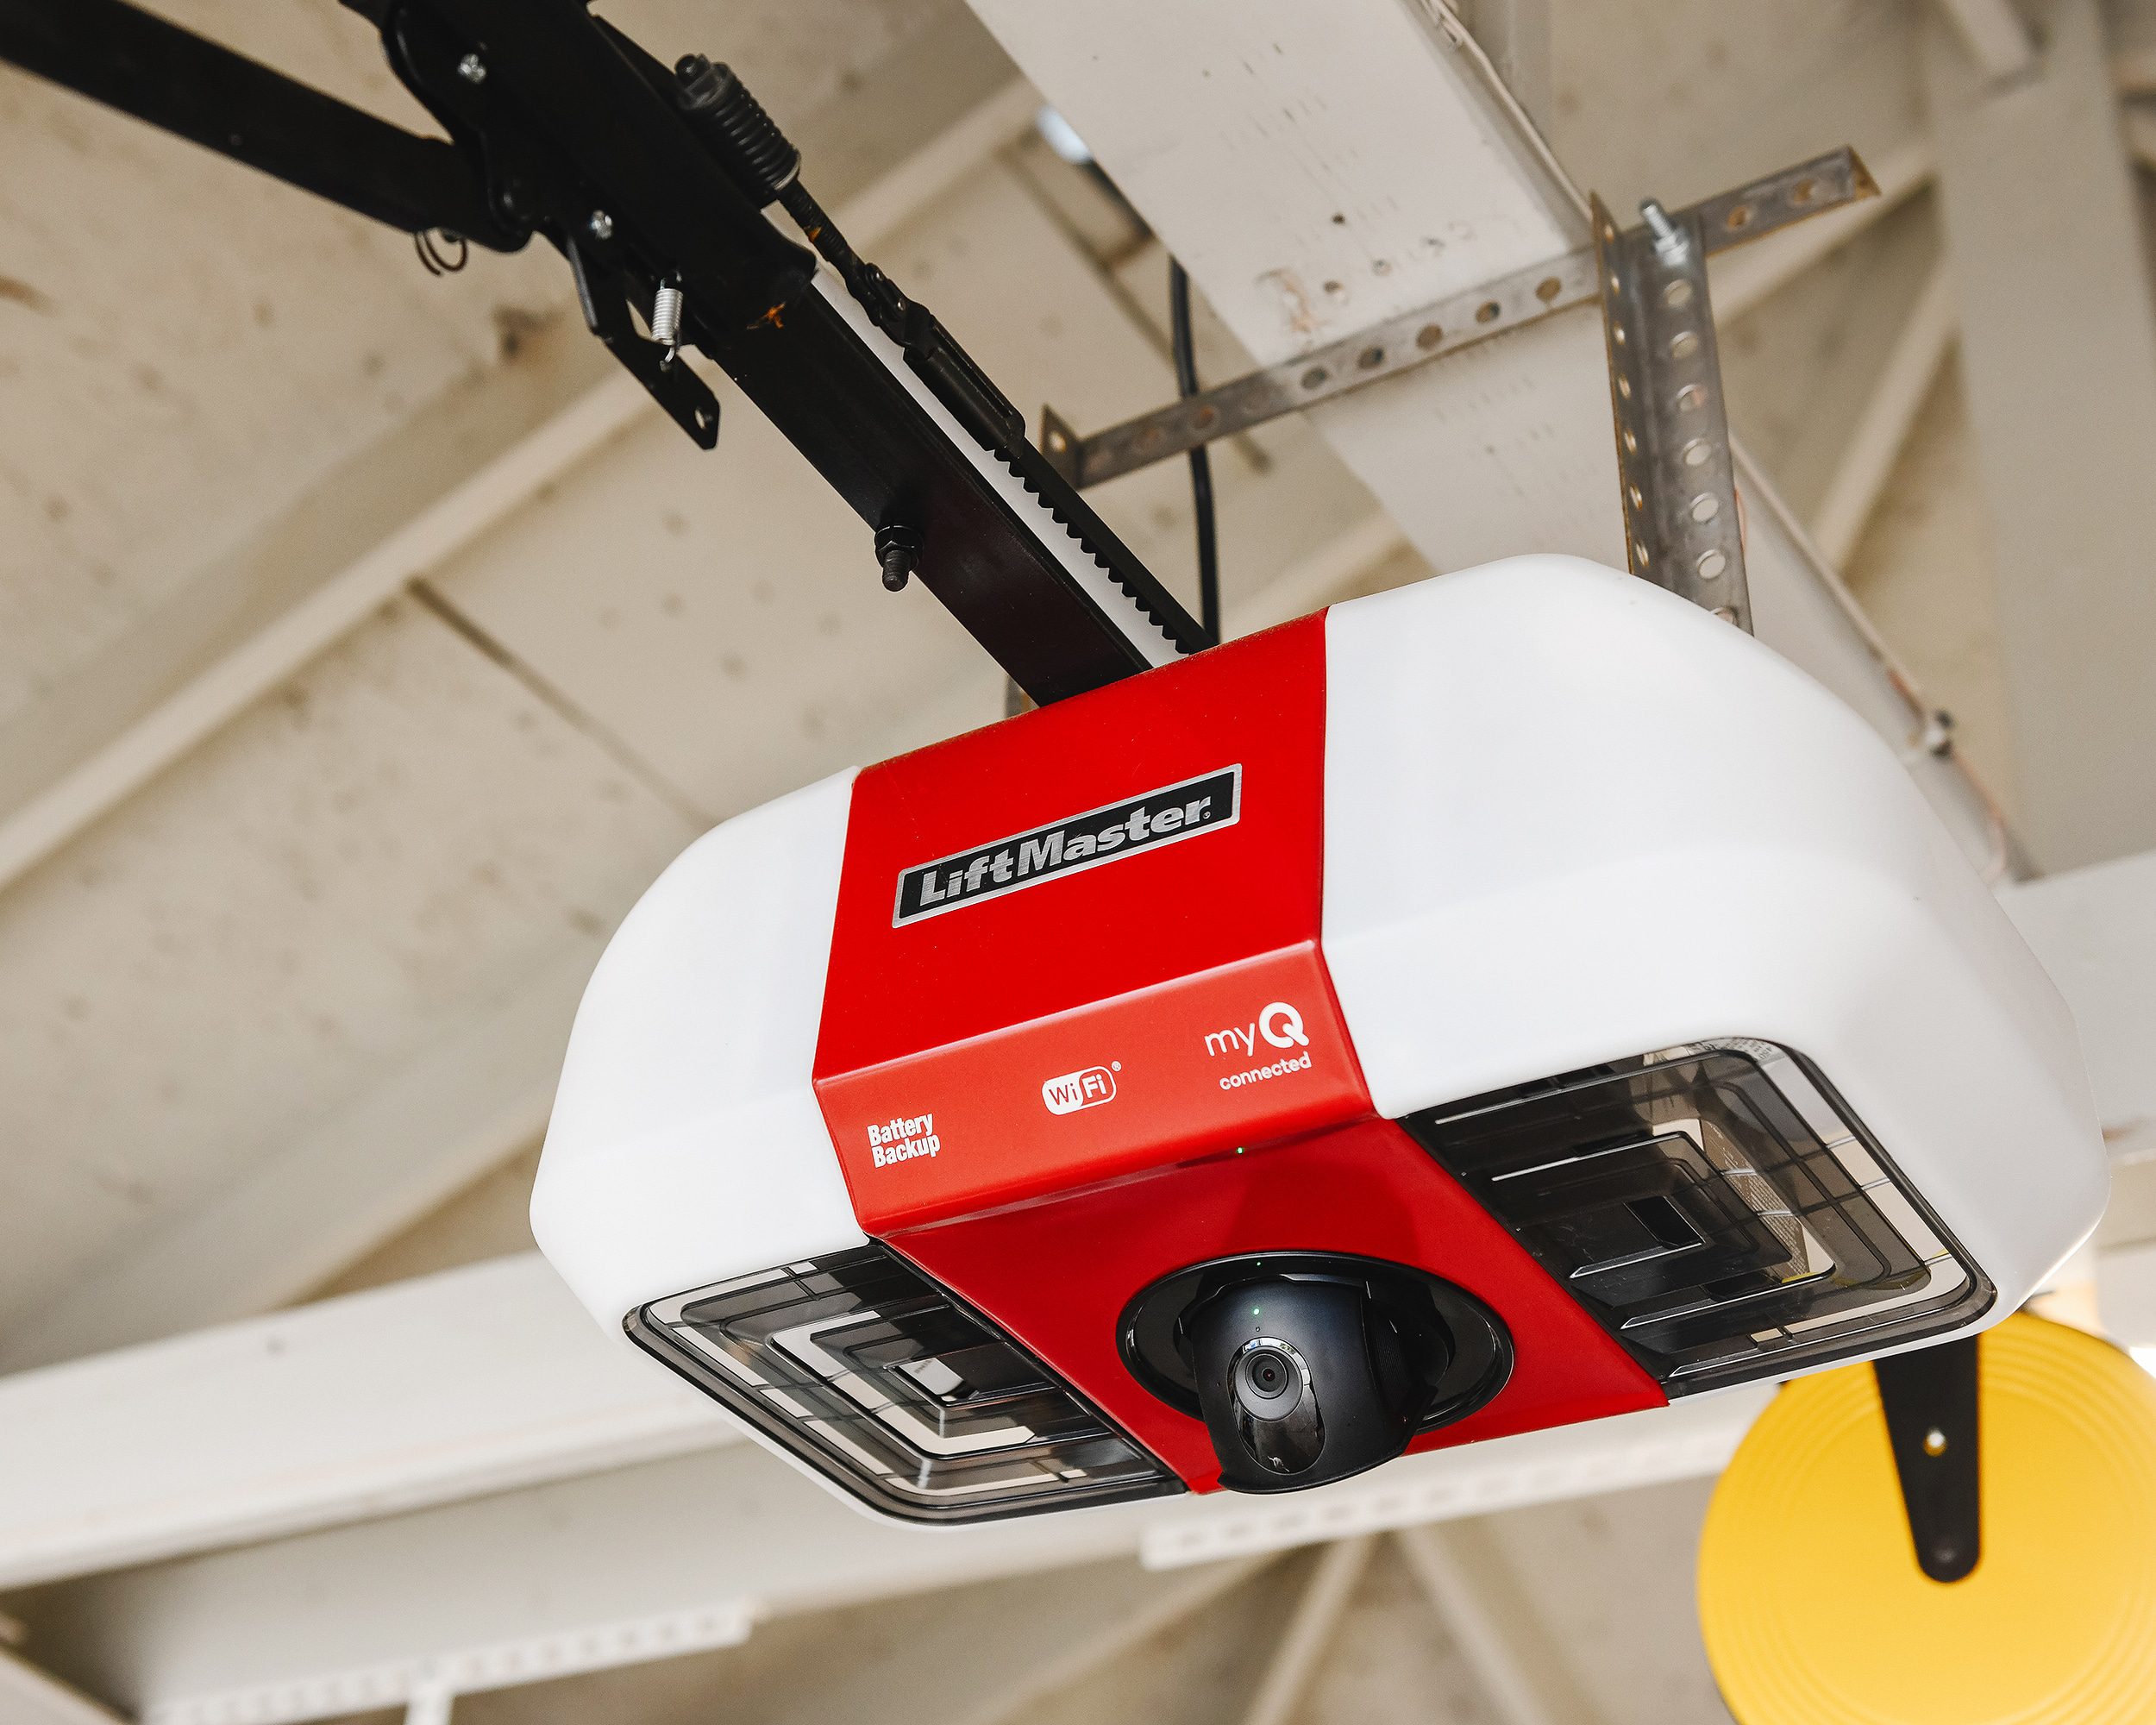 The LiftMaster Secure View garage door opener's camera allows us to keep an eye on the status of our garage door as well as all of our belongings inside. 